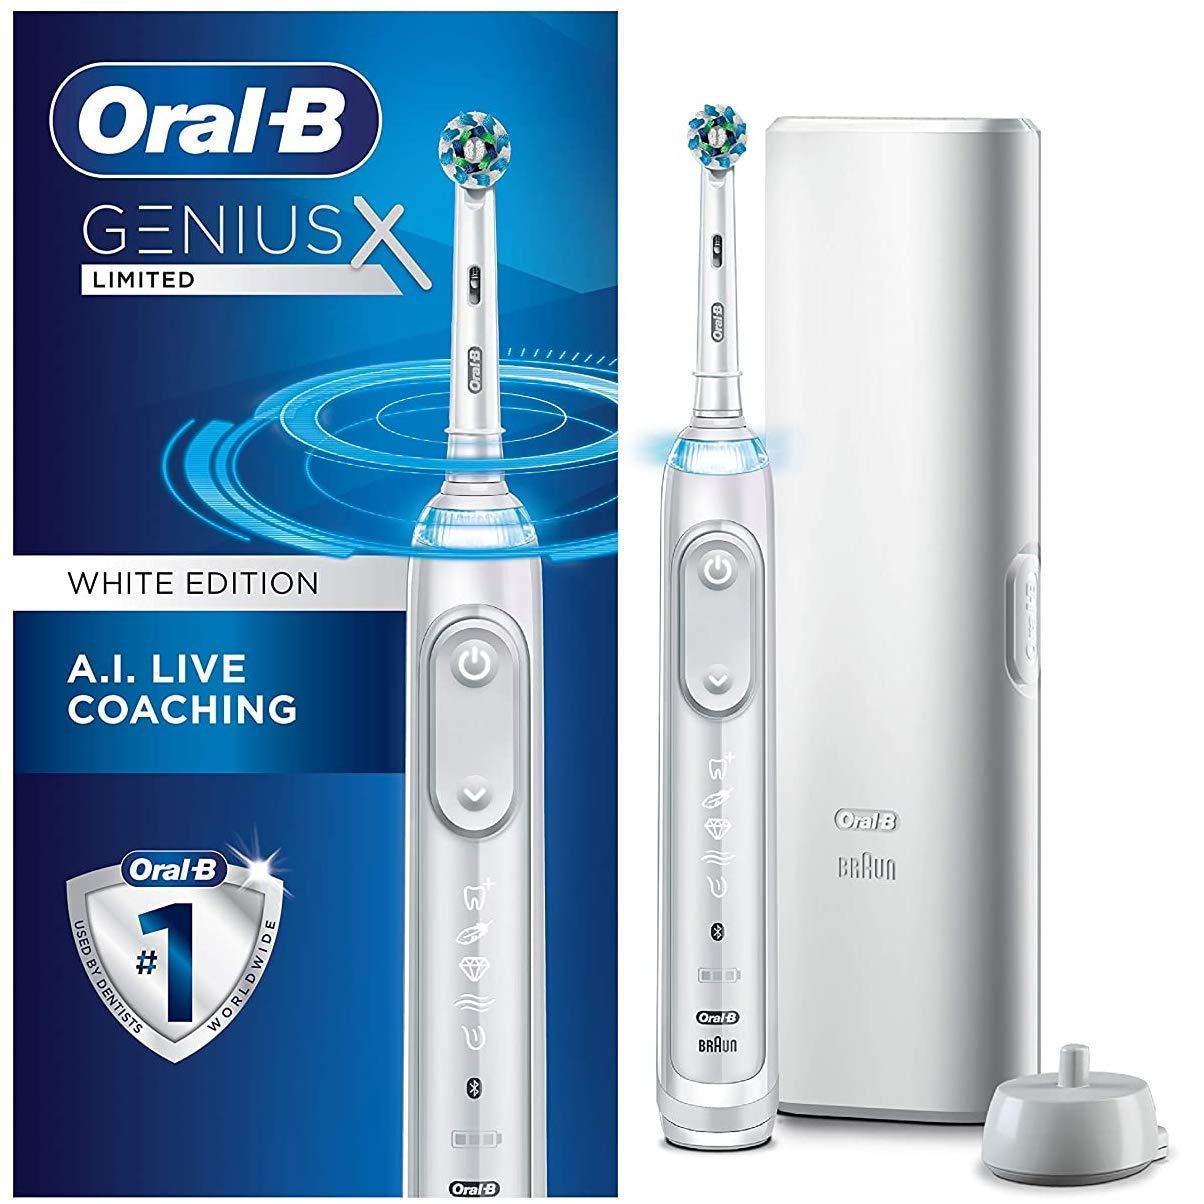 Oral-B Genius X Limited Rechargeable Electric Toothbrush for $99.99 Shipped